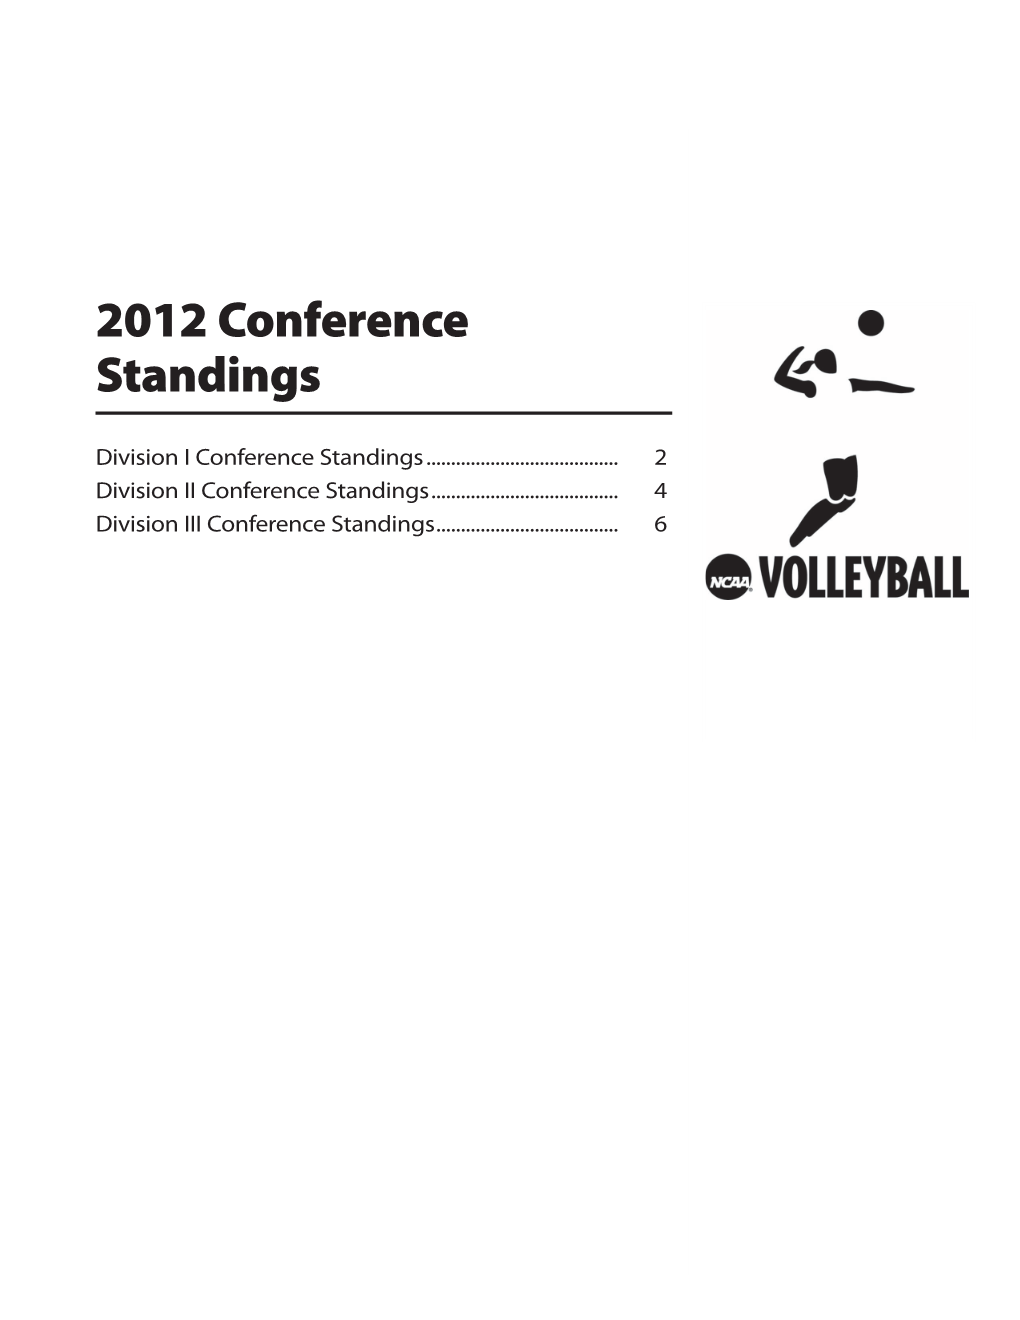 2012 Conference Standings